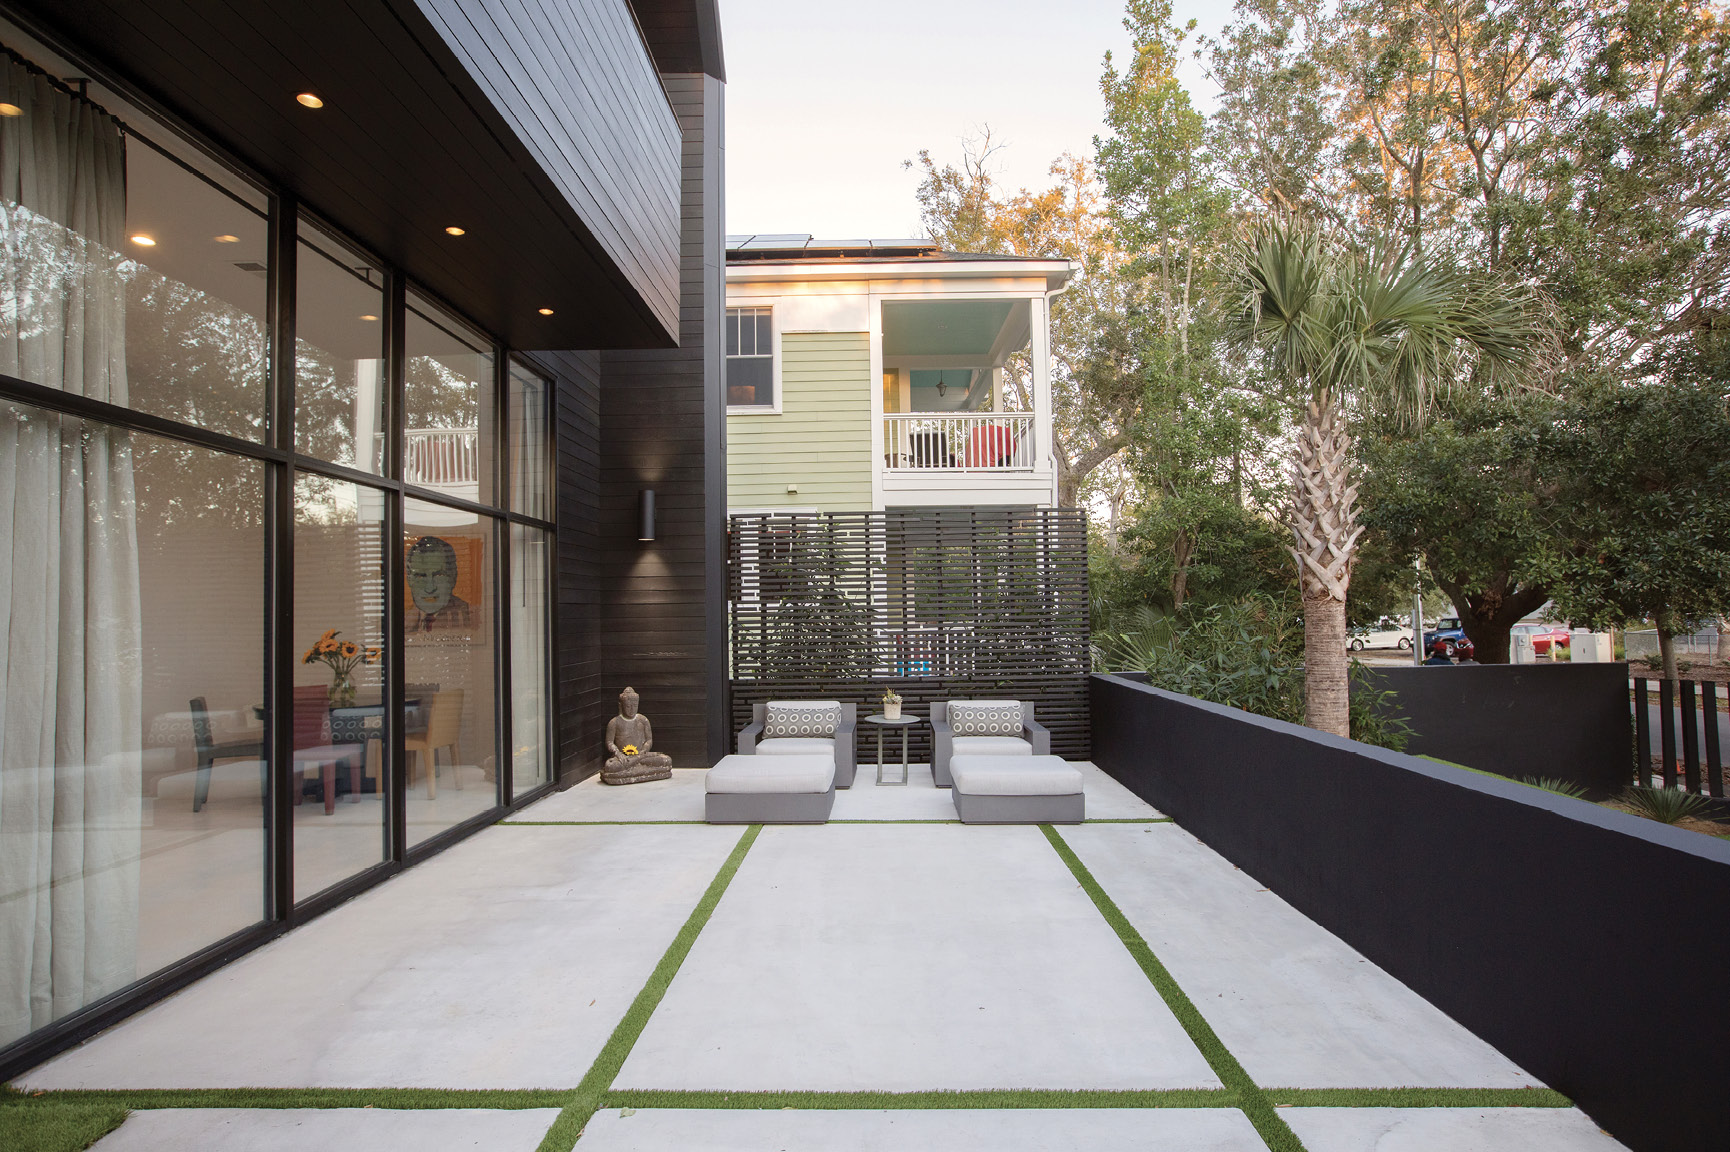 The front terrace strikes a contrast with the traditional porch behind it. Artificial turf between large concrete pavers soften the space, adorned by two Restoration Hardware lounge chairs.